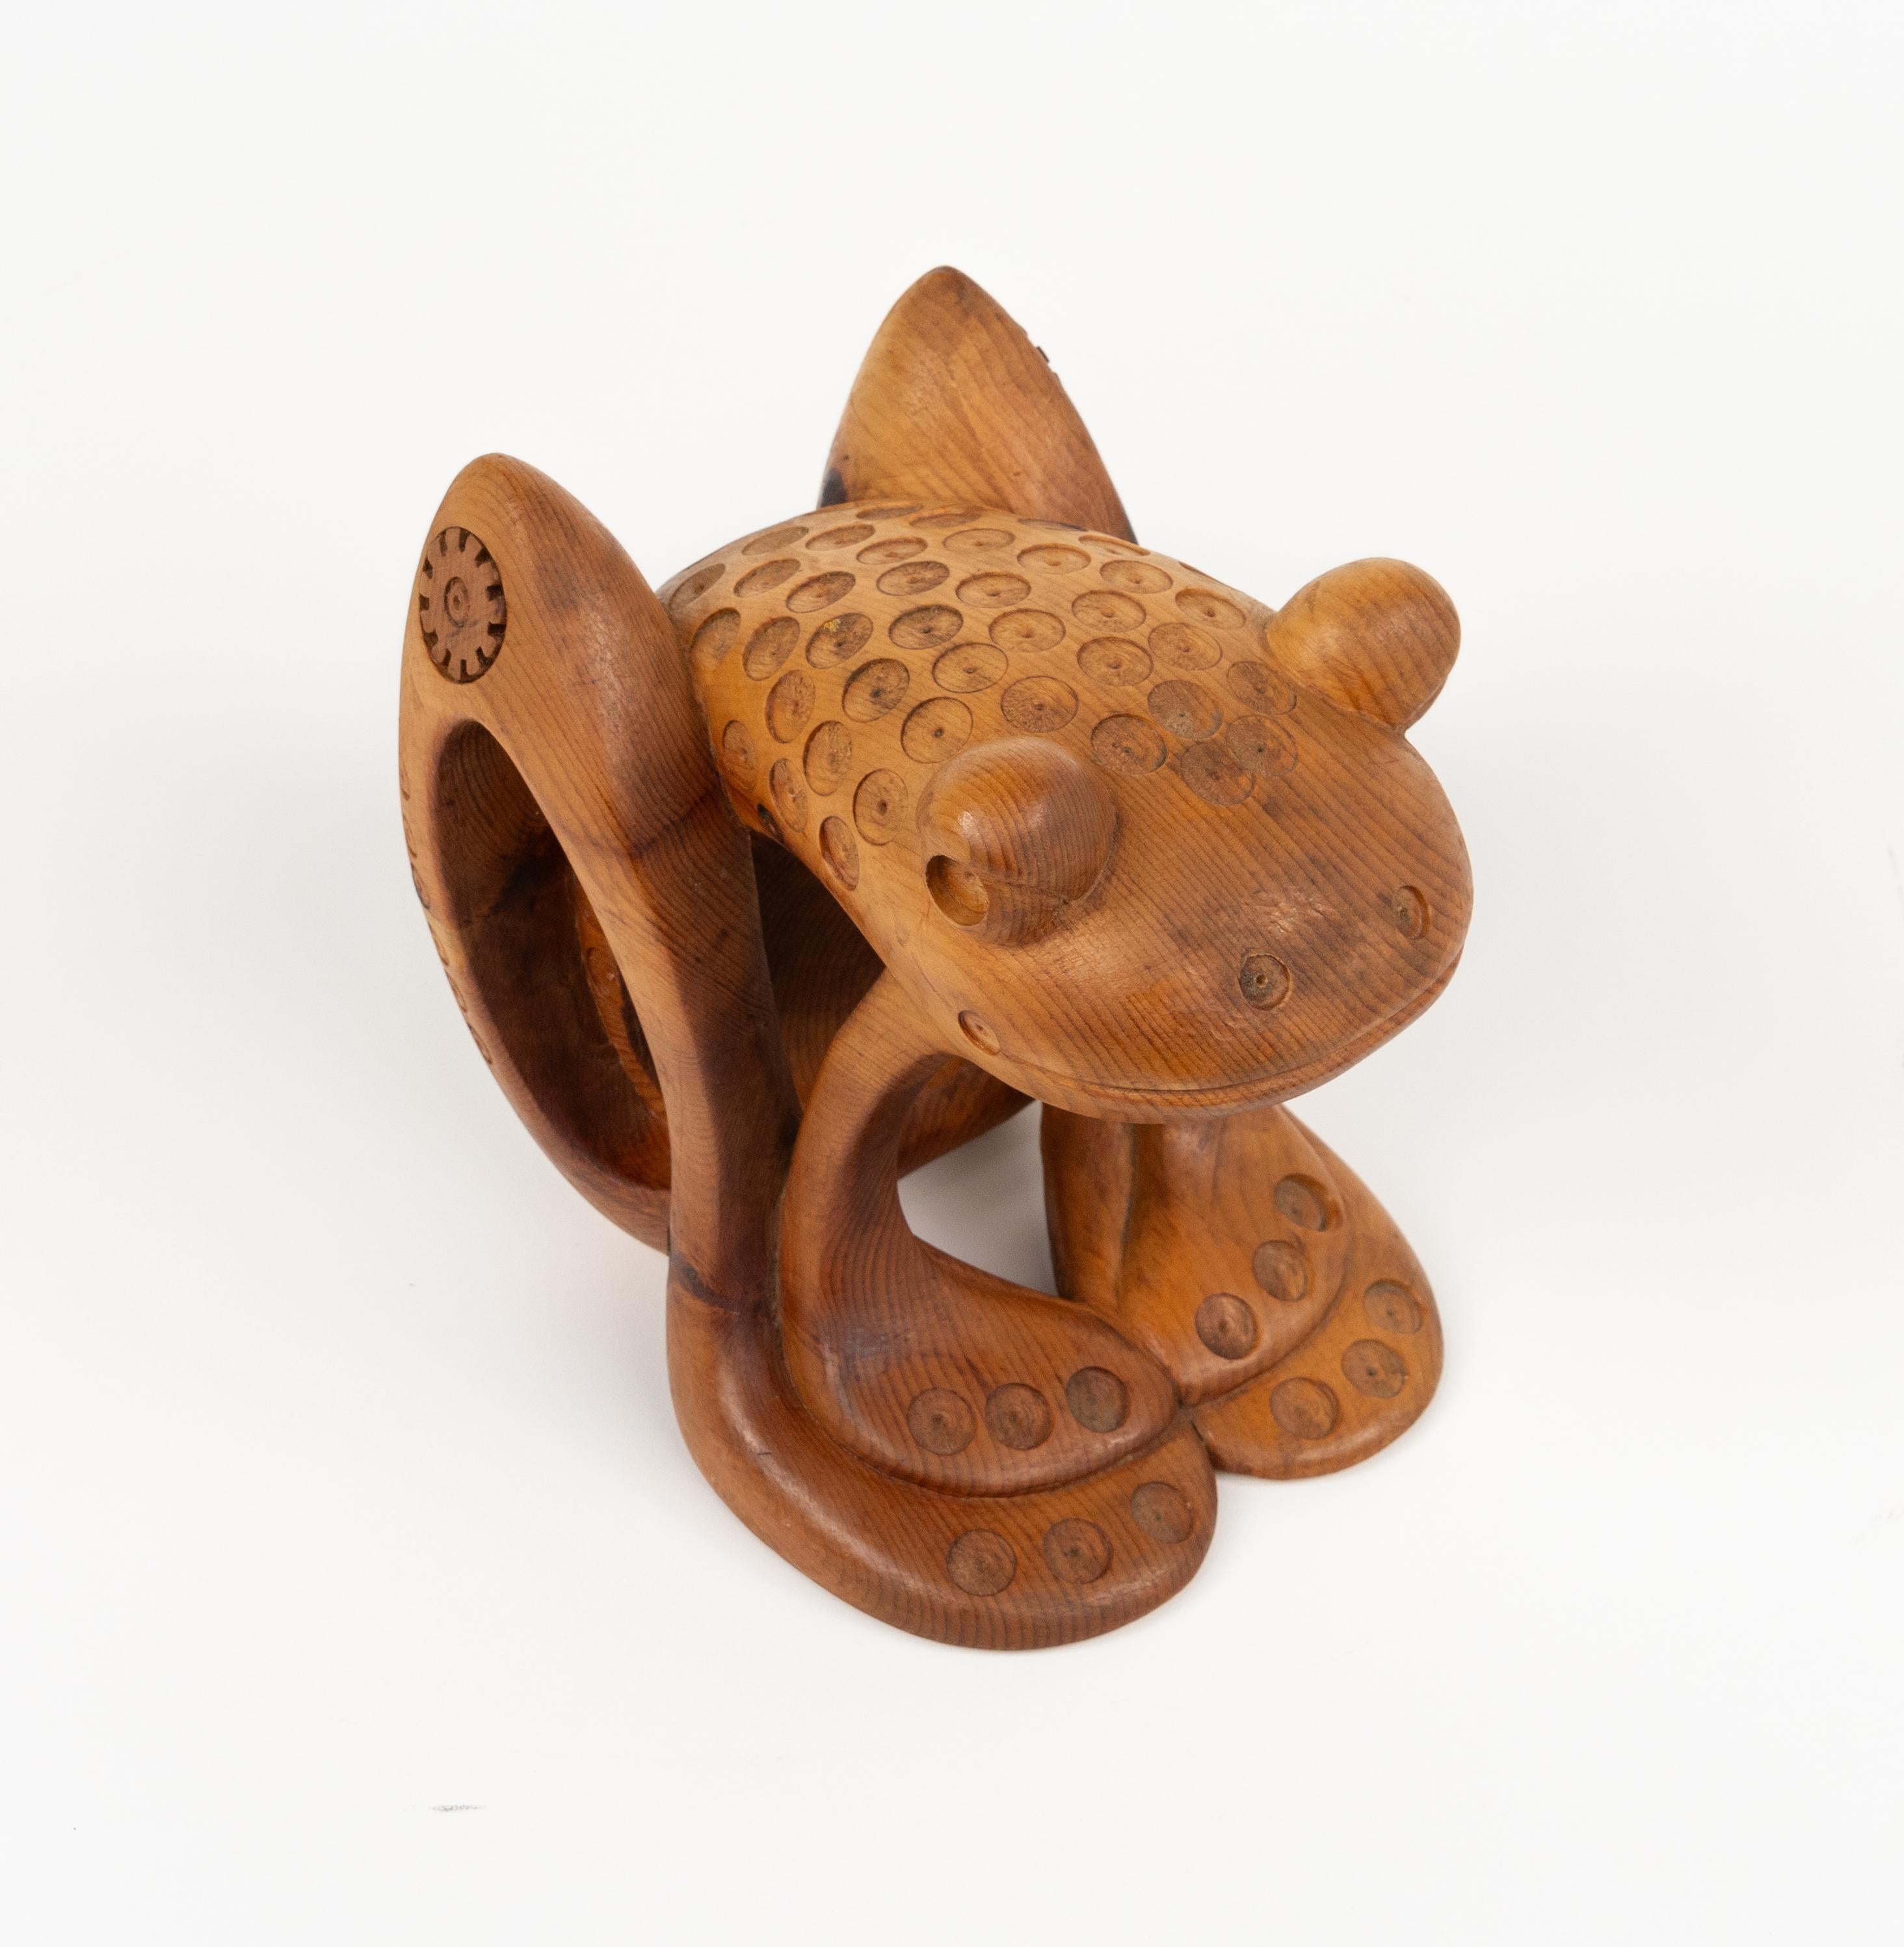 Organic Modern Pine Wood Decorative Sculpture Shape Frog by Ferdinando Codognotto, Italy 2001 For Sale